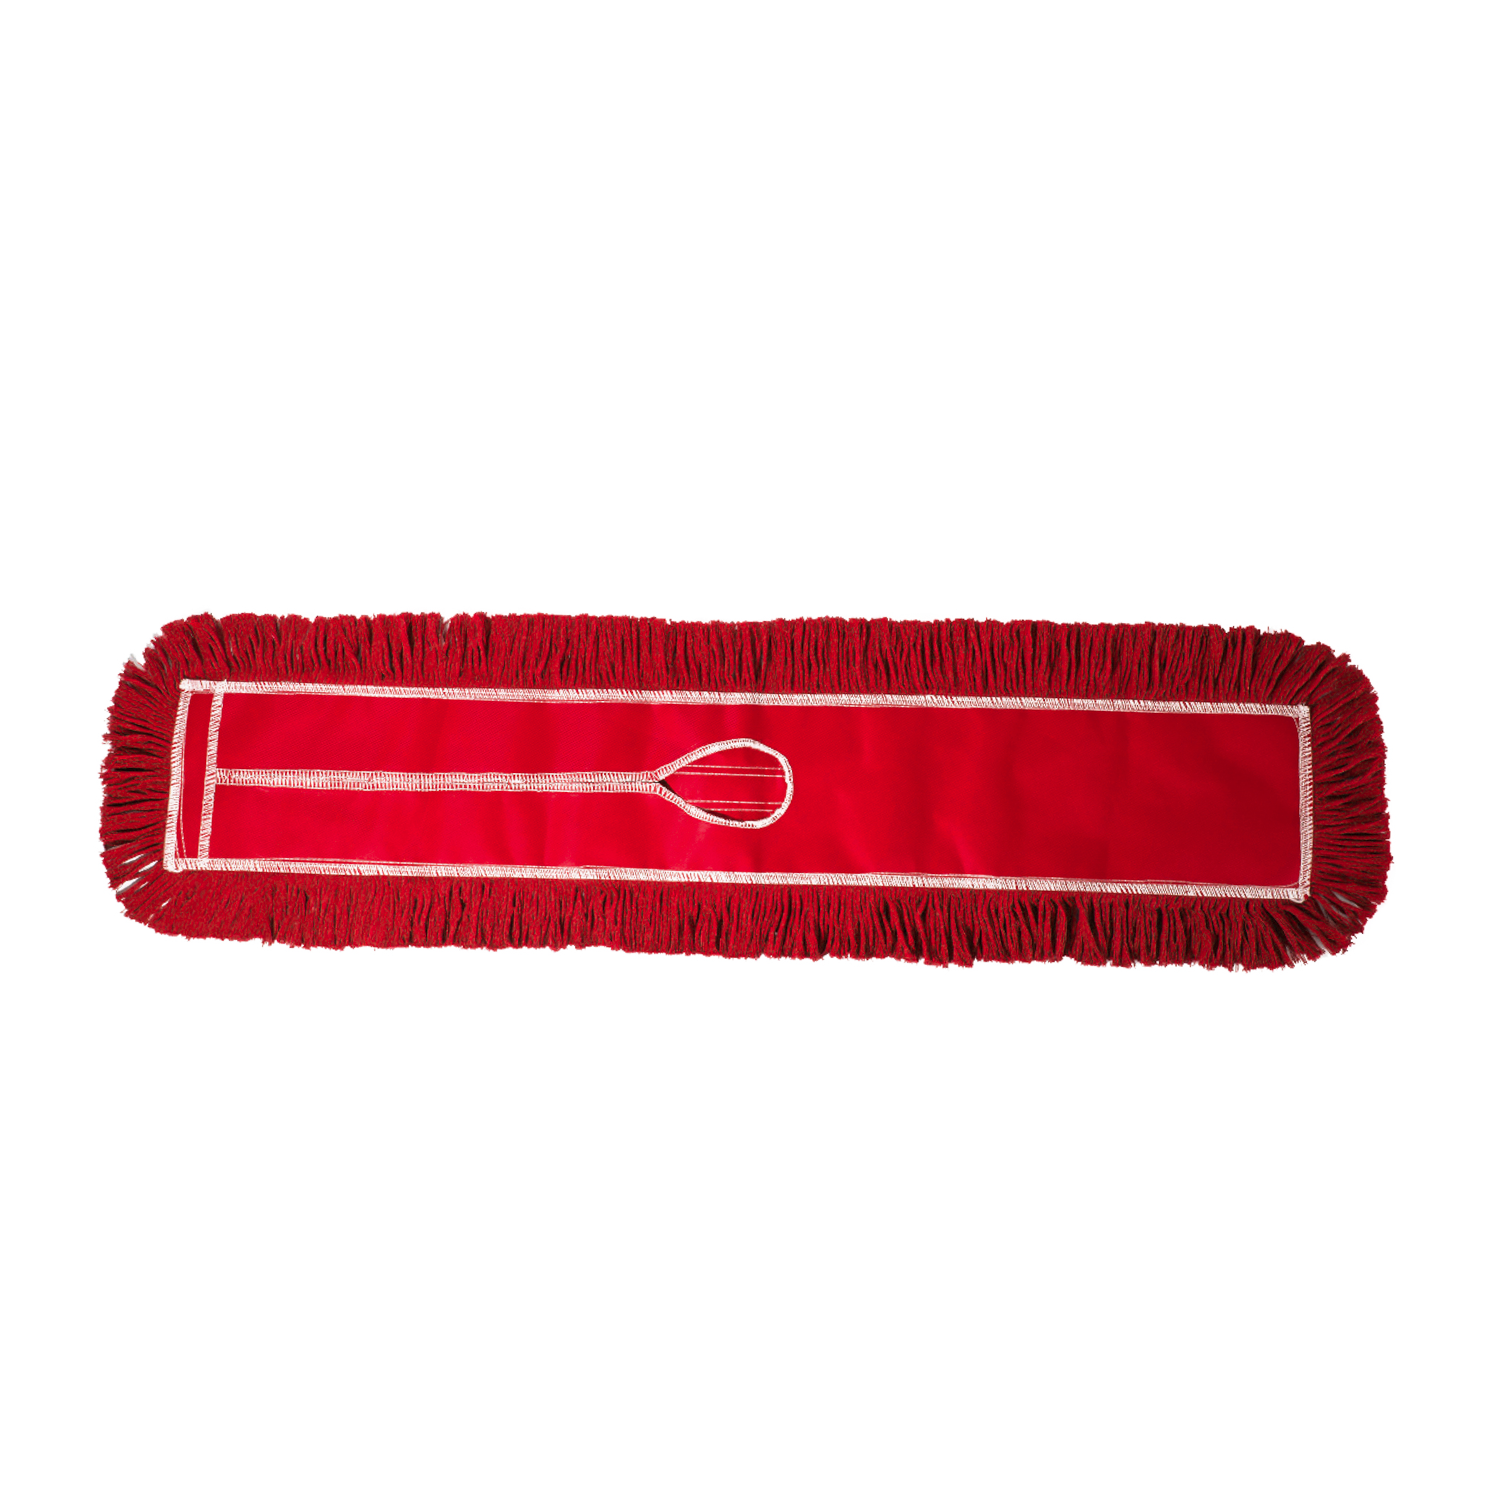 Tidy Tools 36 Inch Dust Mop Refill, Red